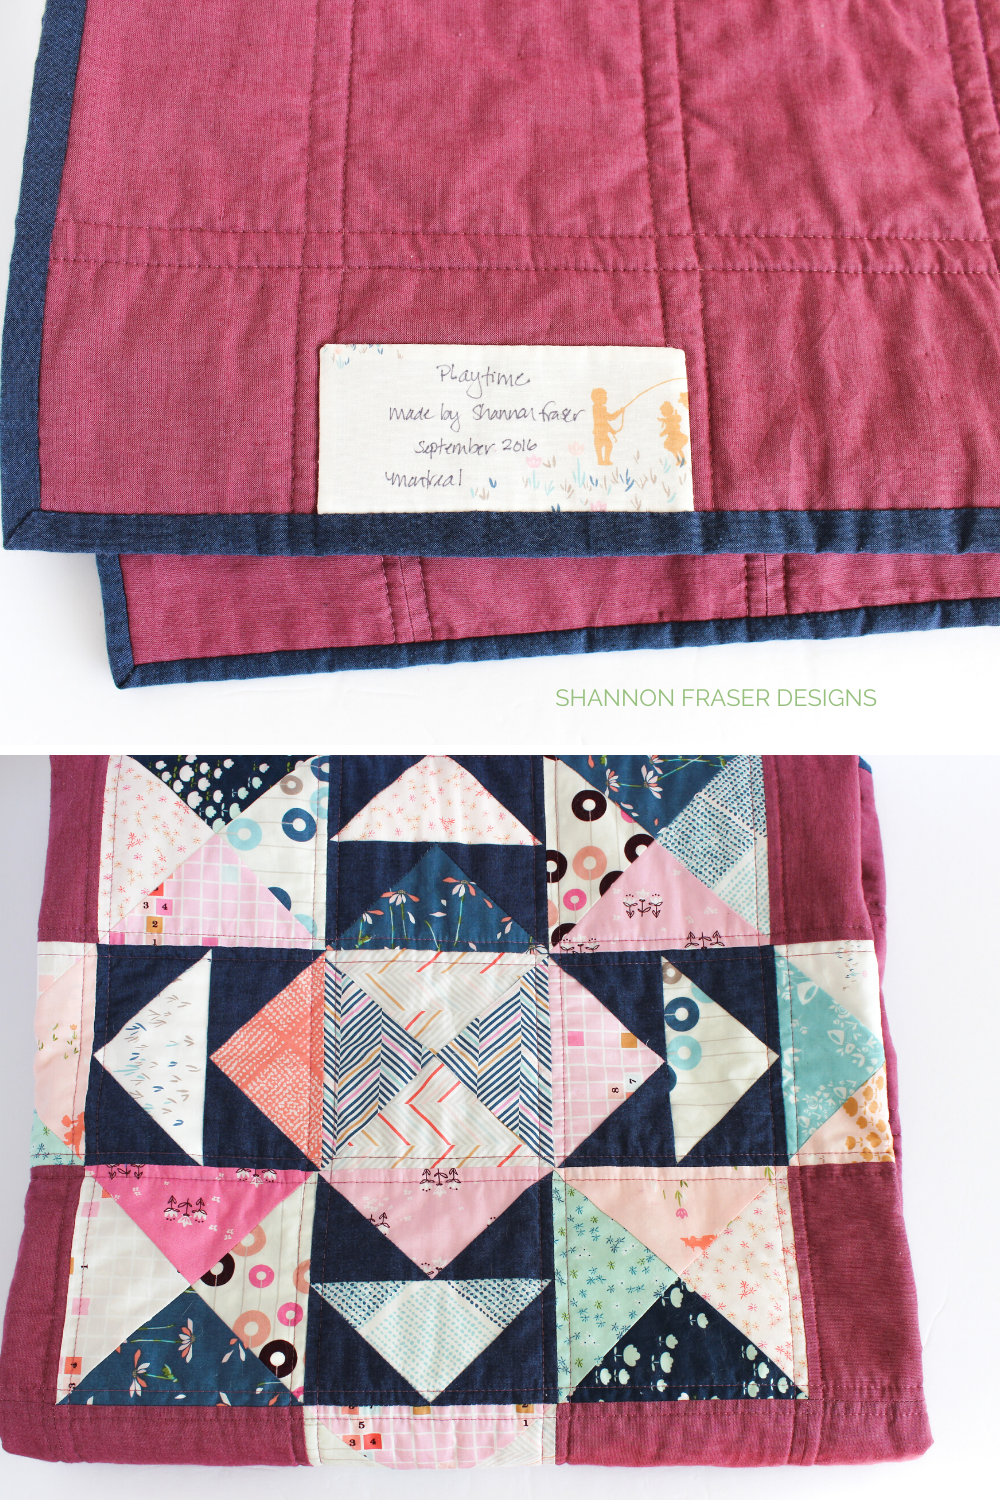 Playtime Quilt featuring custom made DIY quilt label. Click for the step-by-step tutorial on how to make custom quilt labels at home. Plus, download the free quilt pattern so your quilts never go undocumented again! Shannon Fraser Designs #quiltlabel